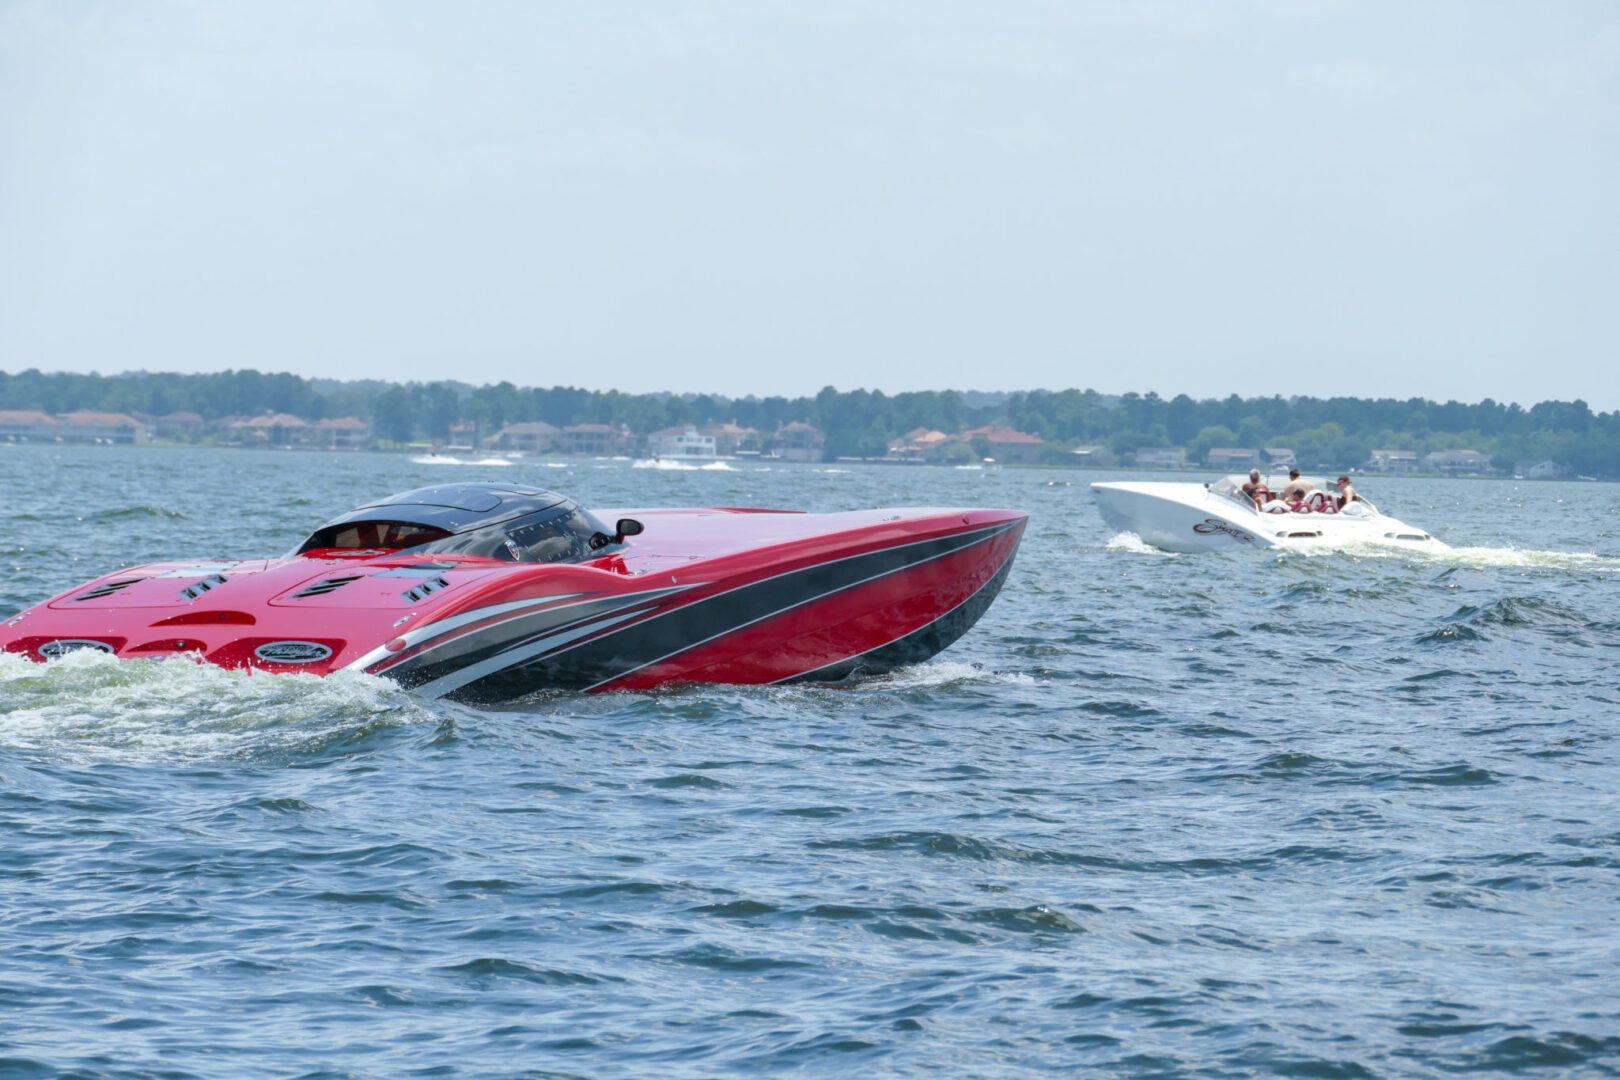 Two speed boats on the ocean